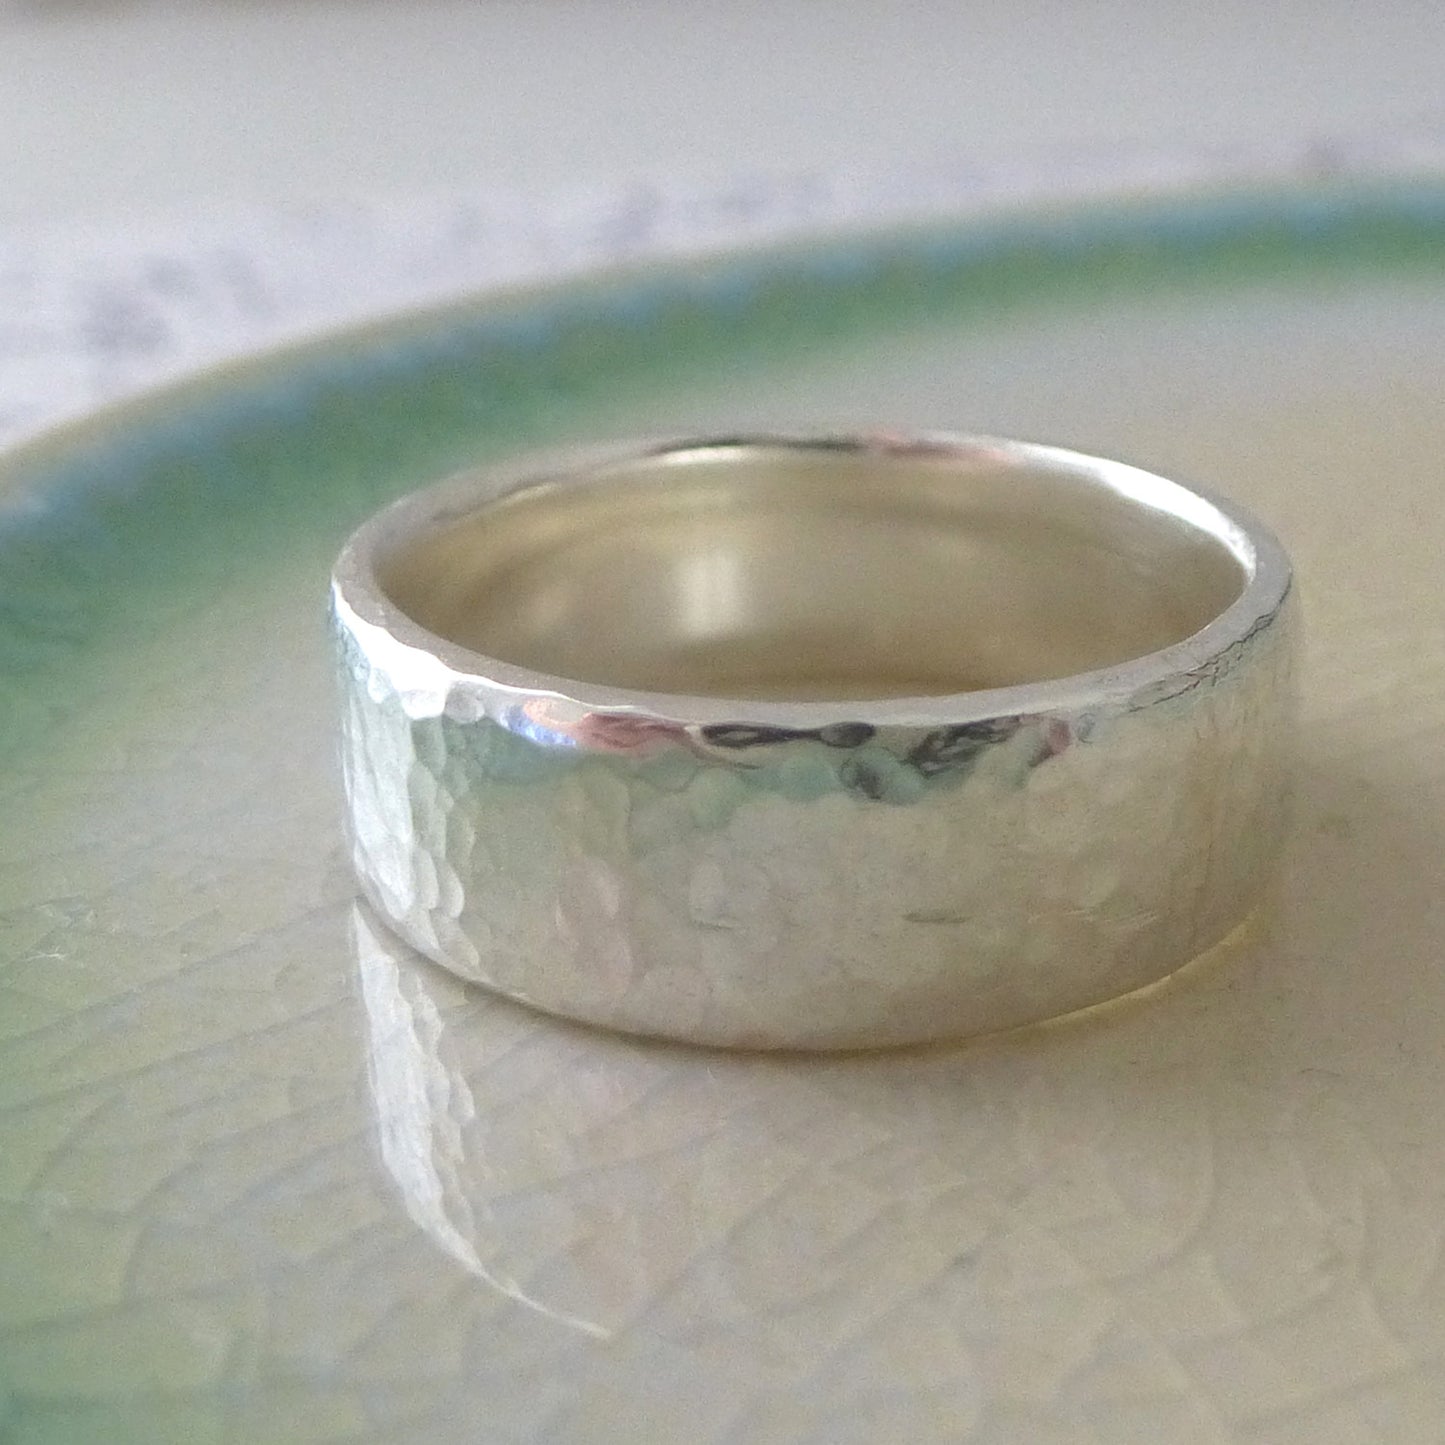 Hand Shaped Band Ring in Sterling Silver - 6mm - Hammered or Smooth